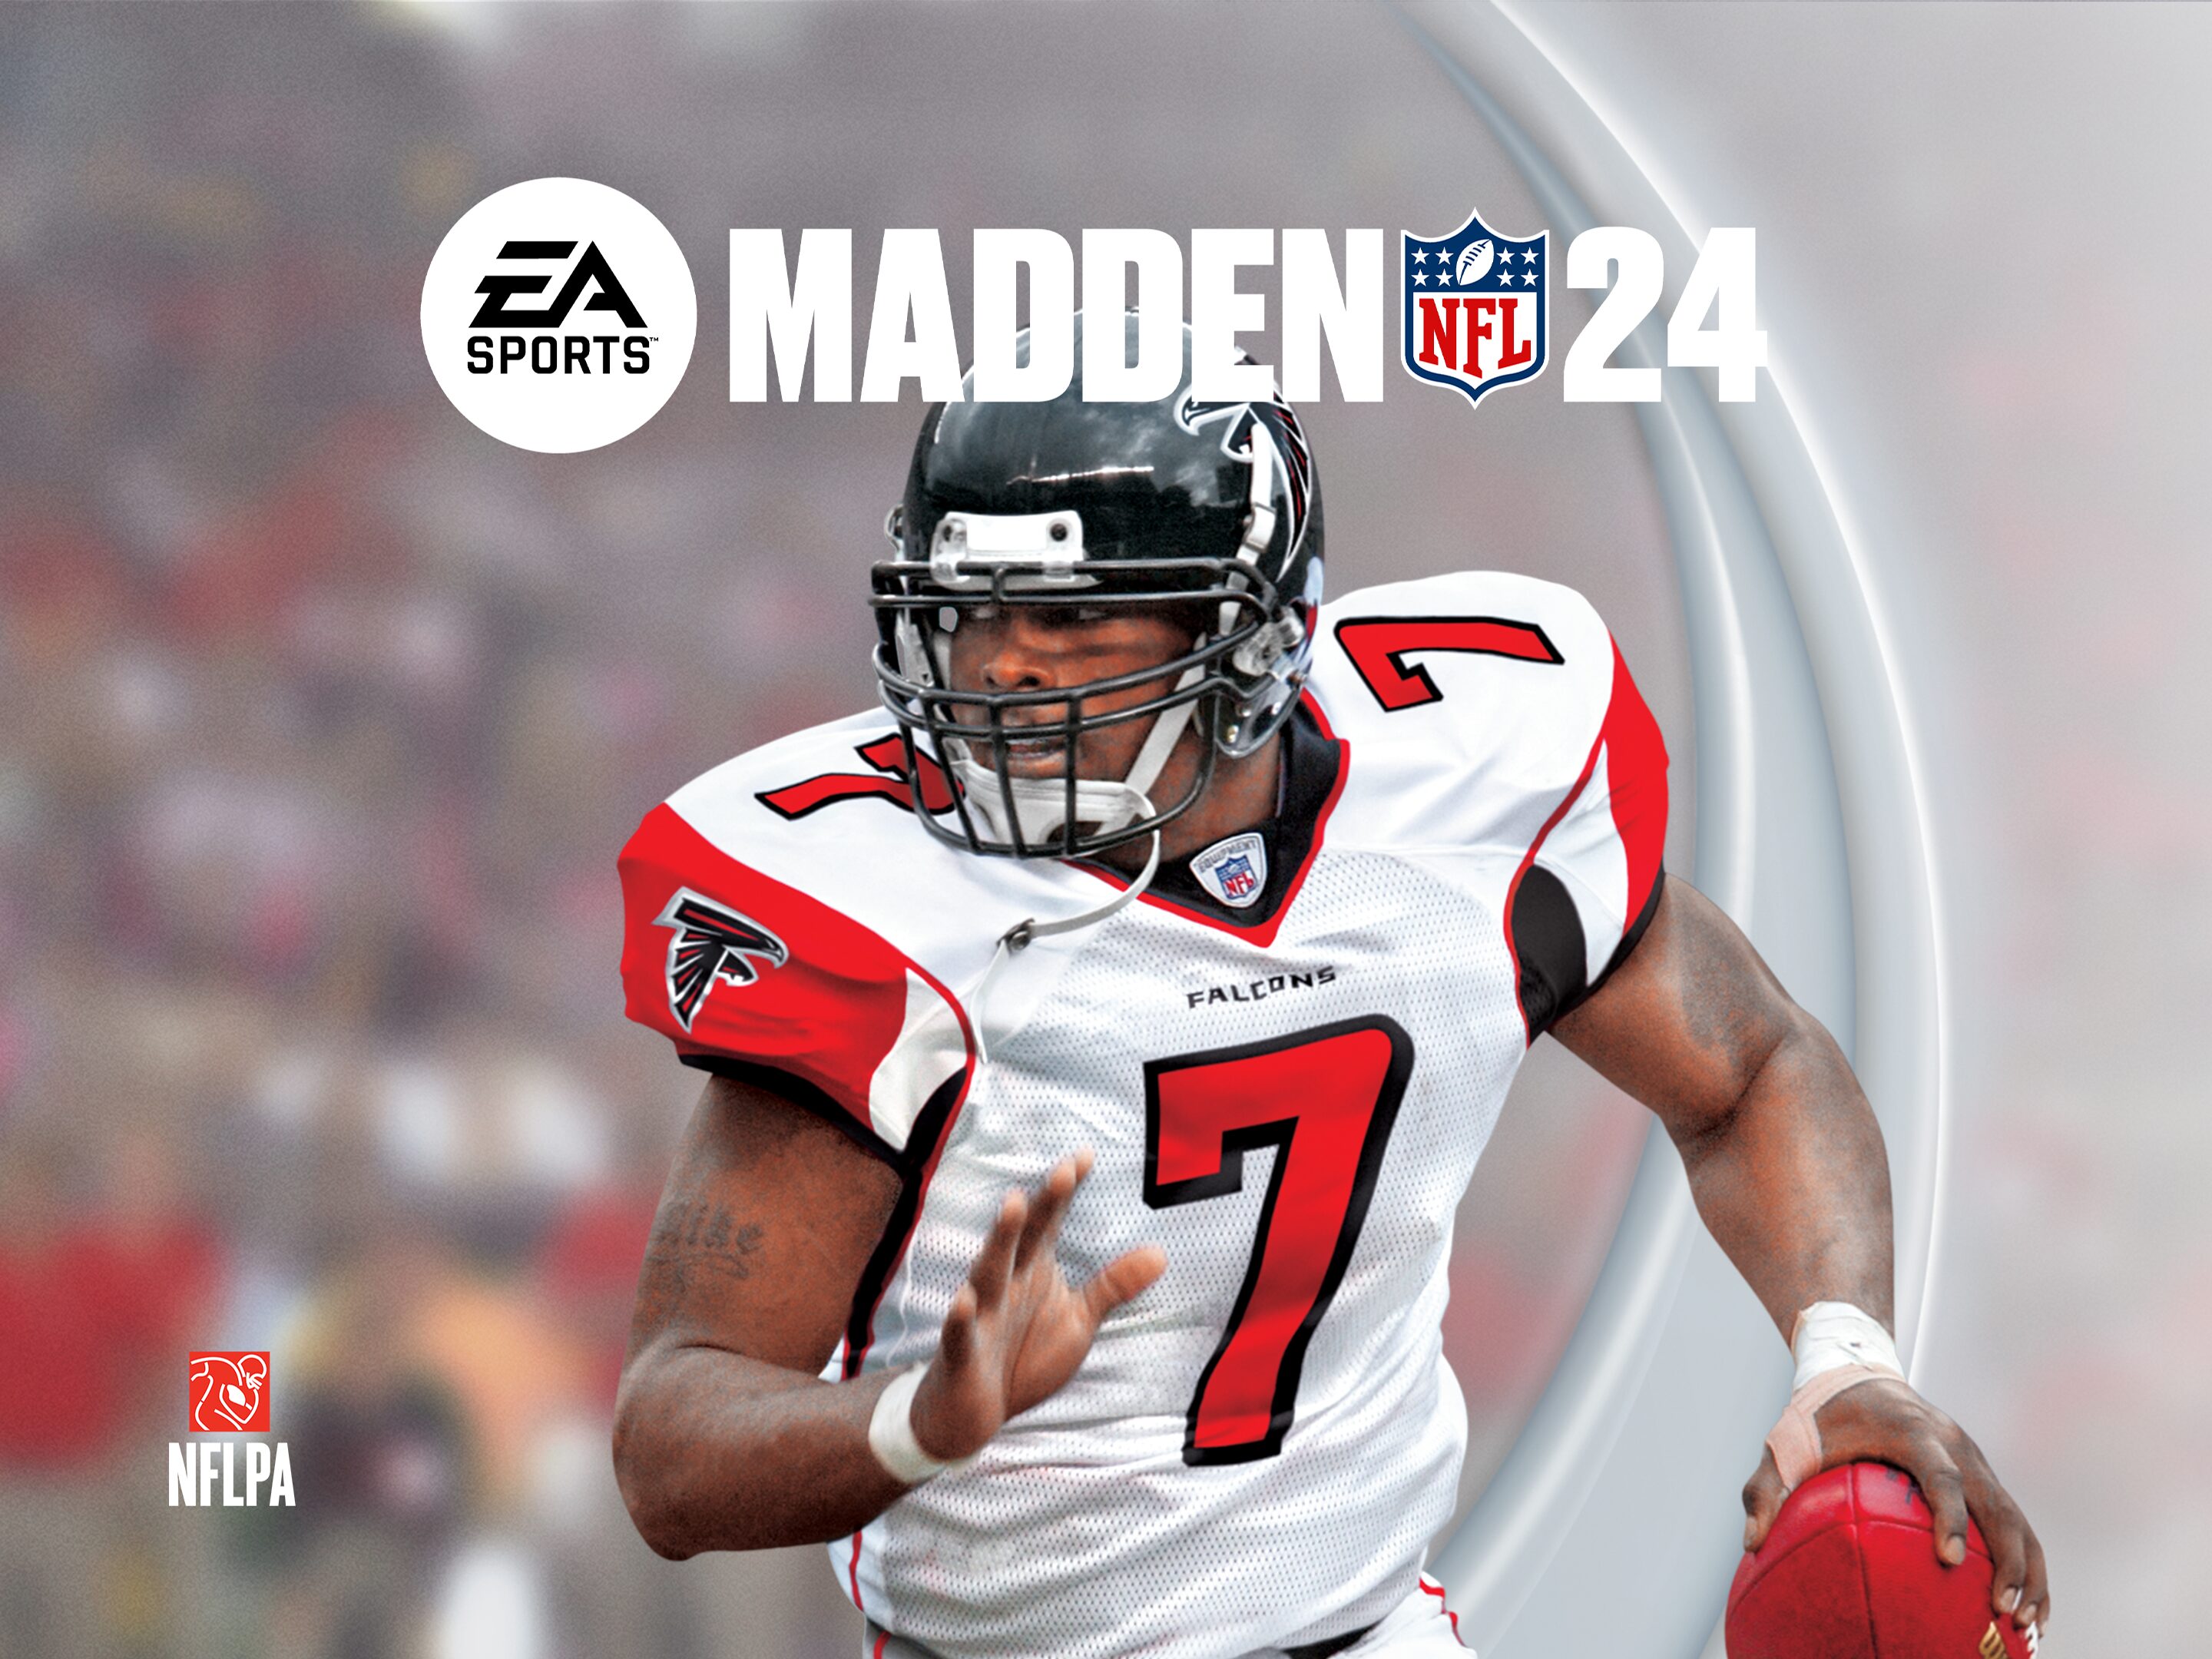 Ps5 can download from ea play now : r/Madden